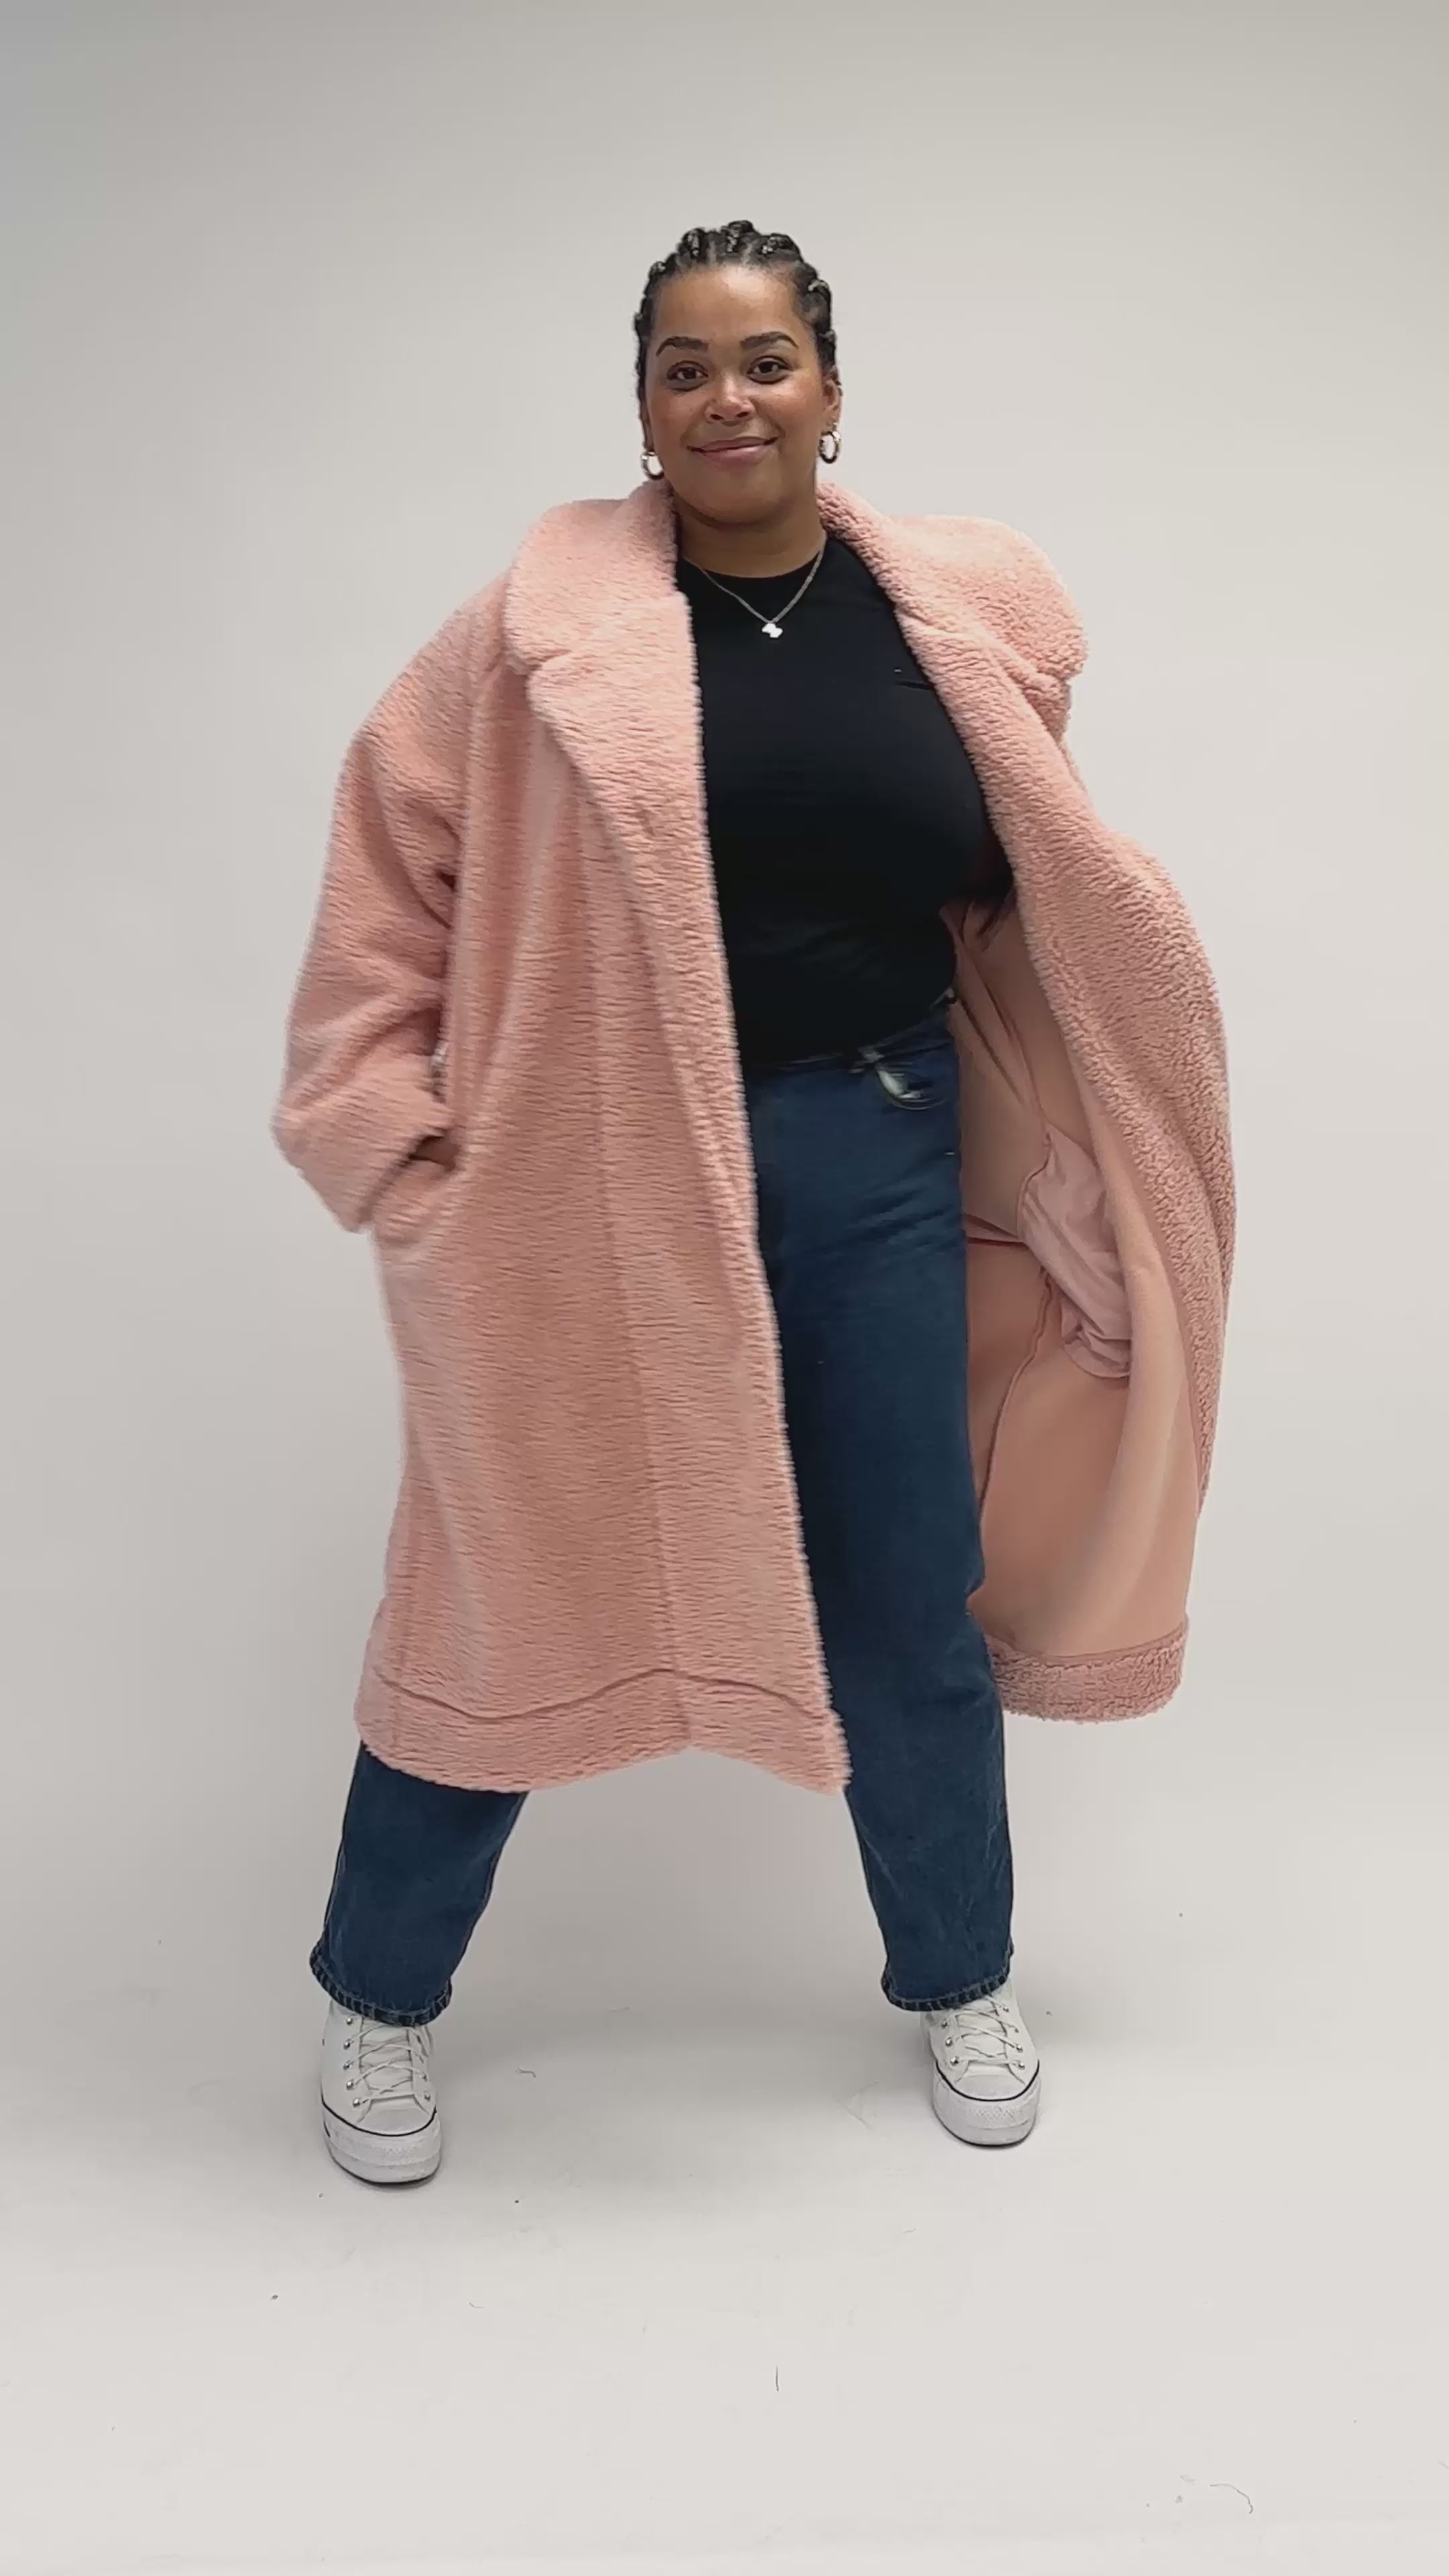 Smash + Tess and Kaitlyn Bristowe Cozy Chic Teddy Coat in Rosé Pink